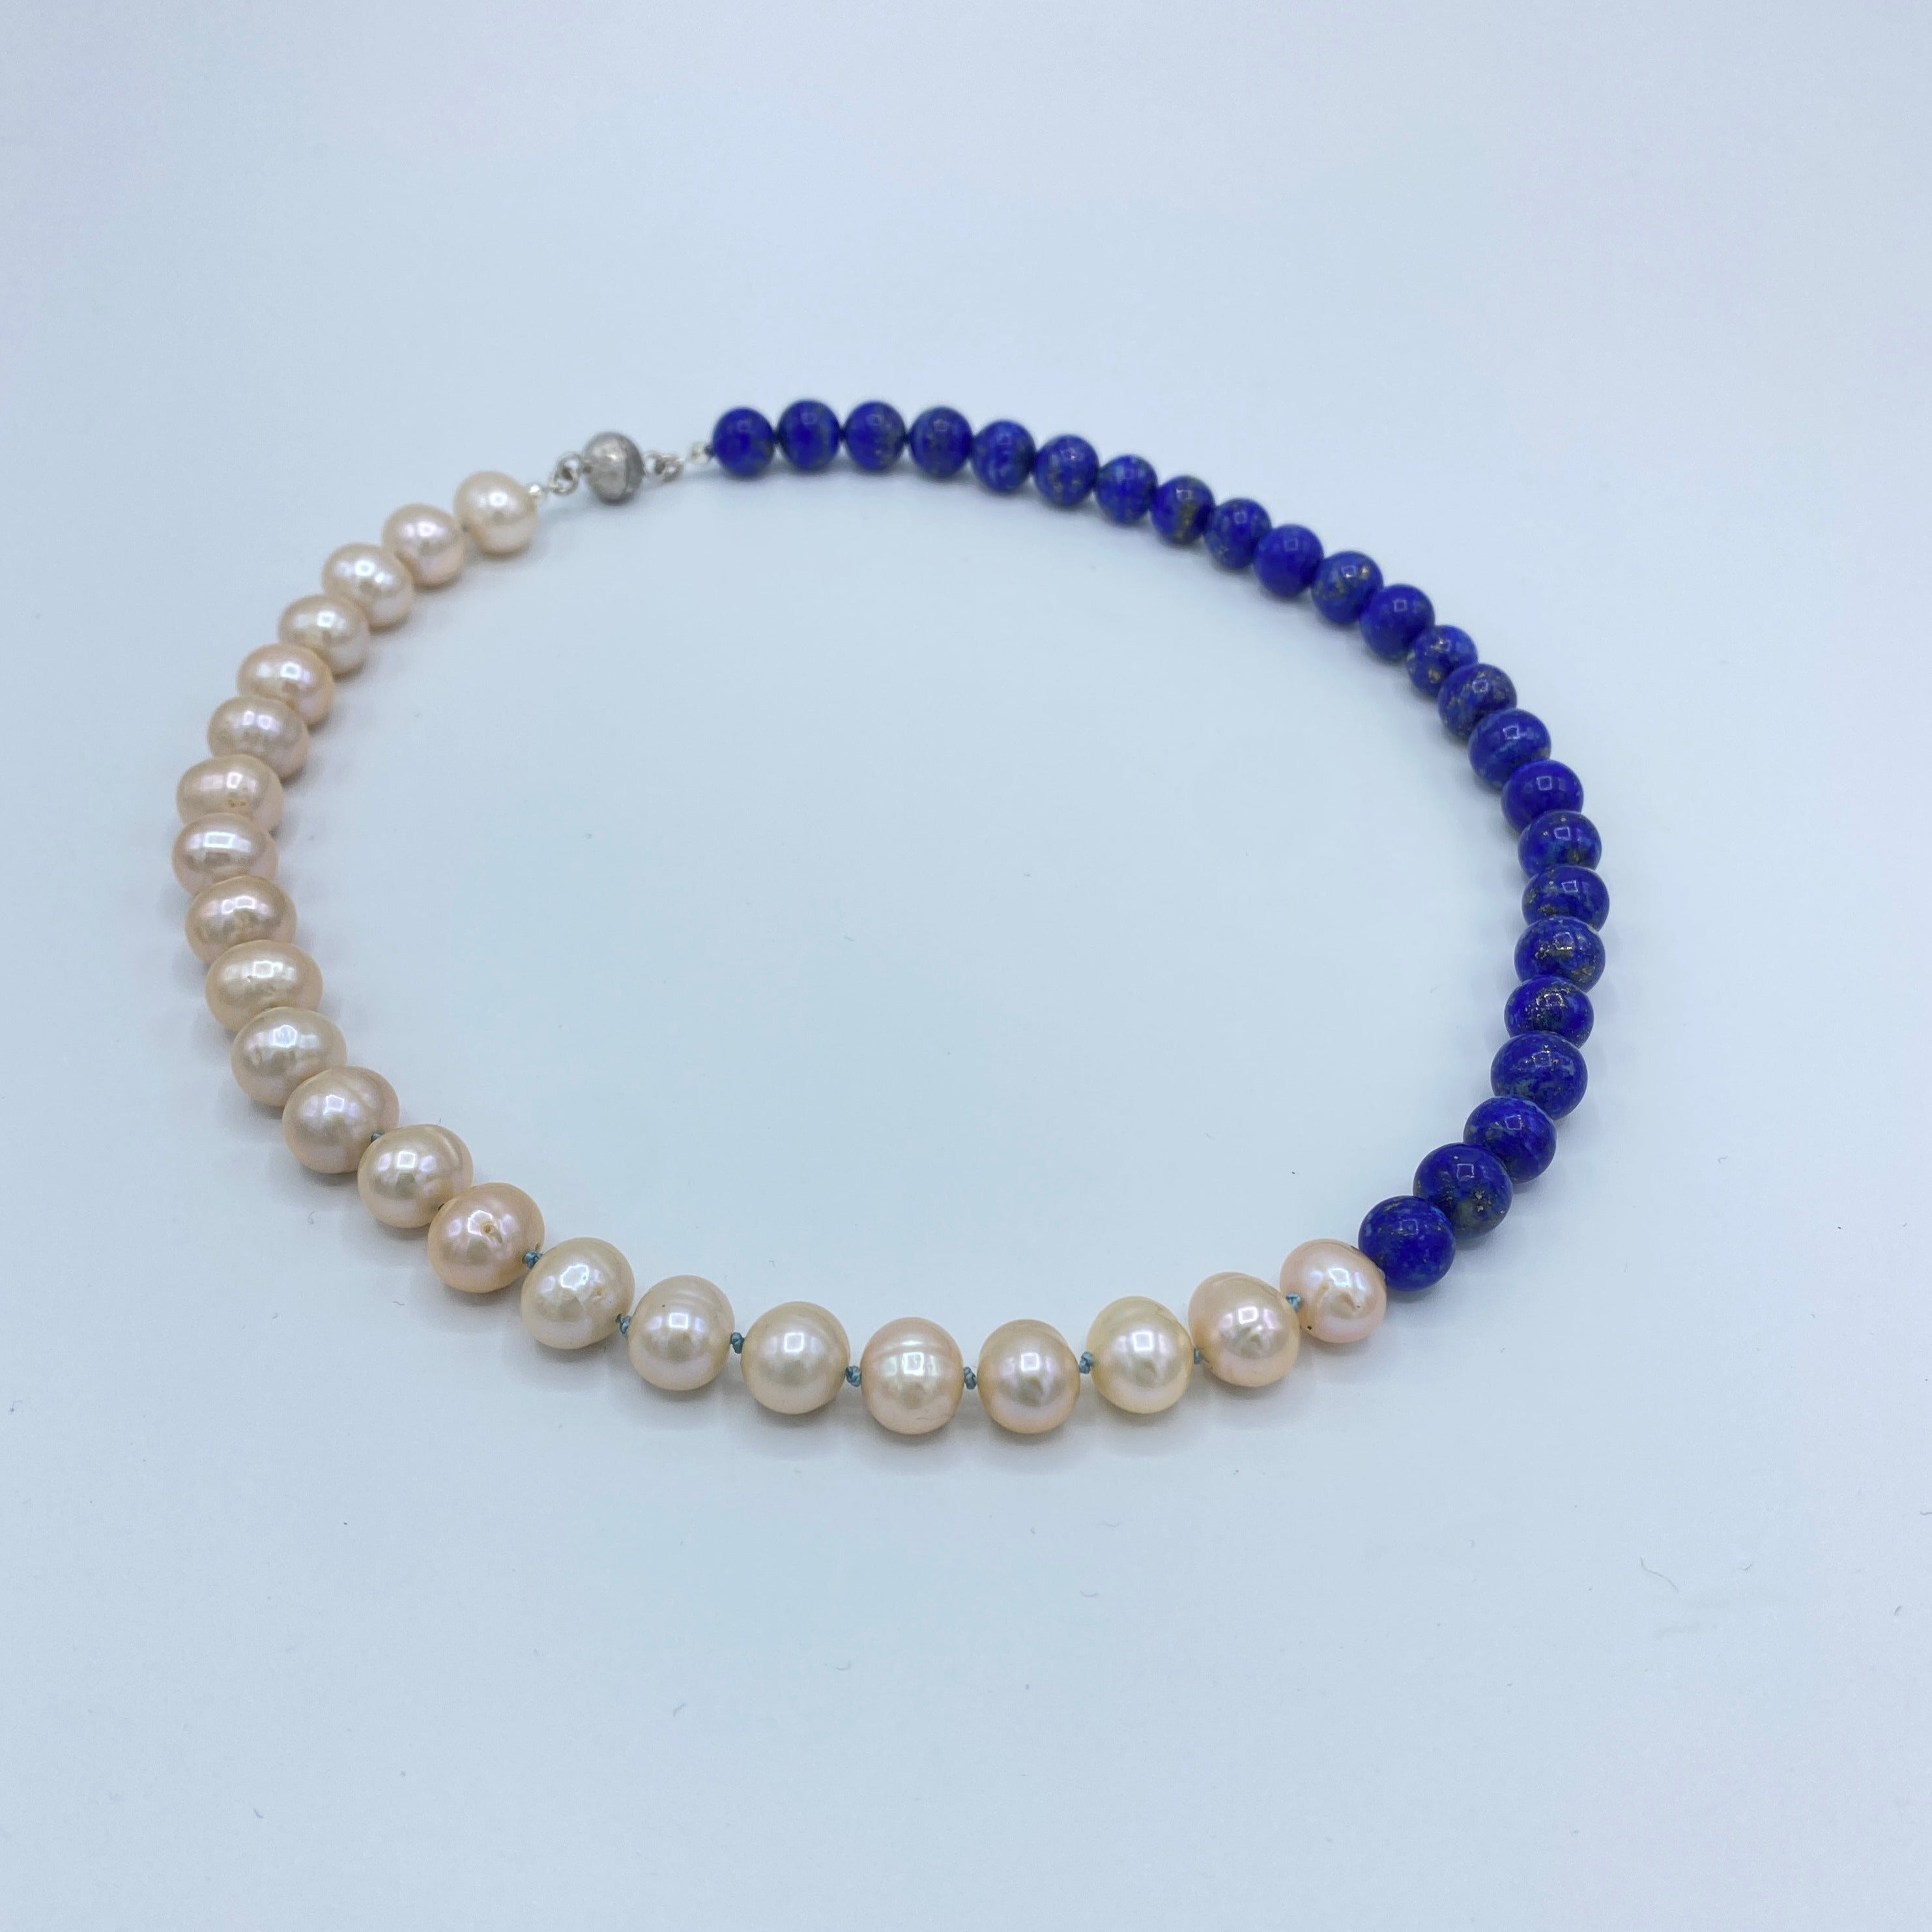 COLLIER with Pearls and Lapis